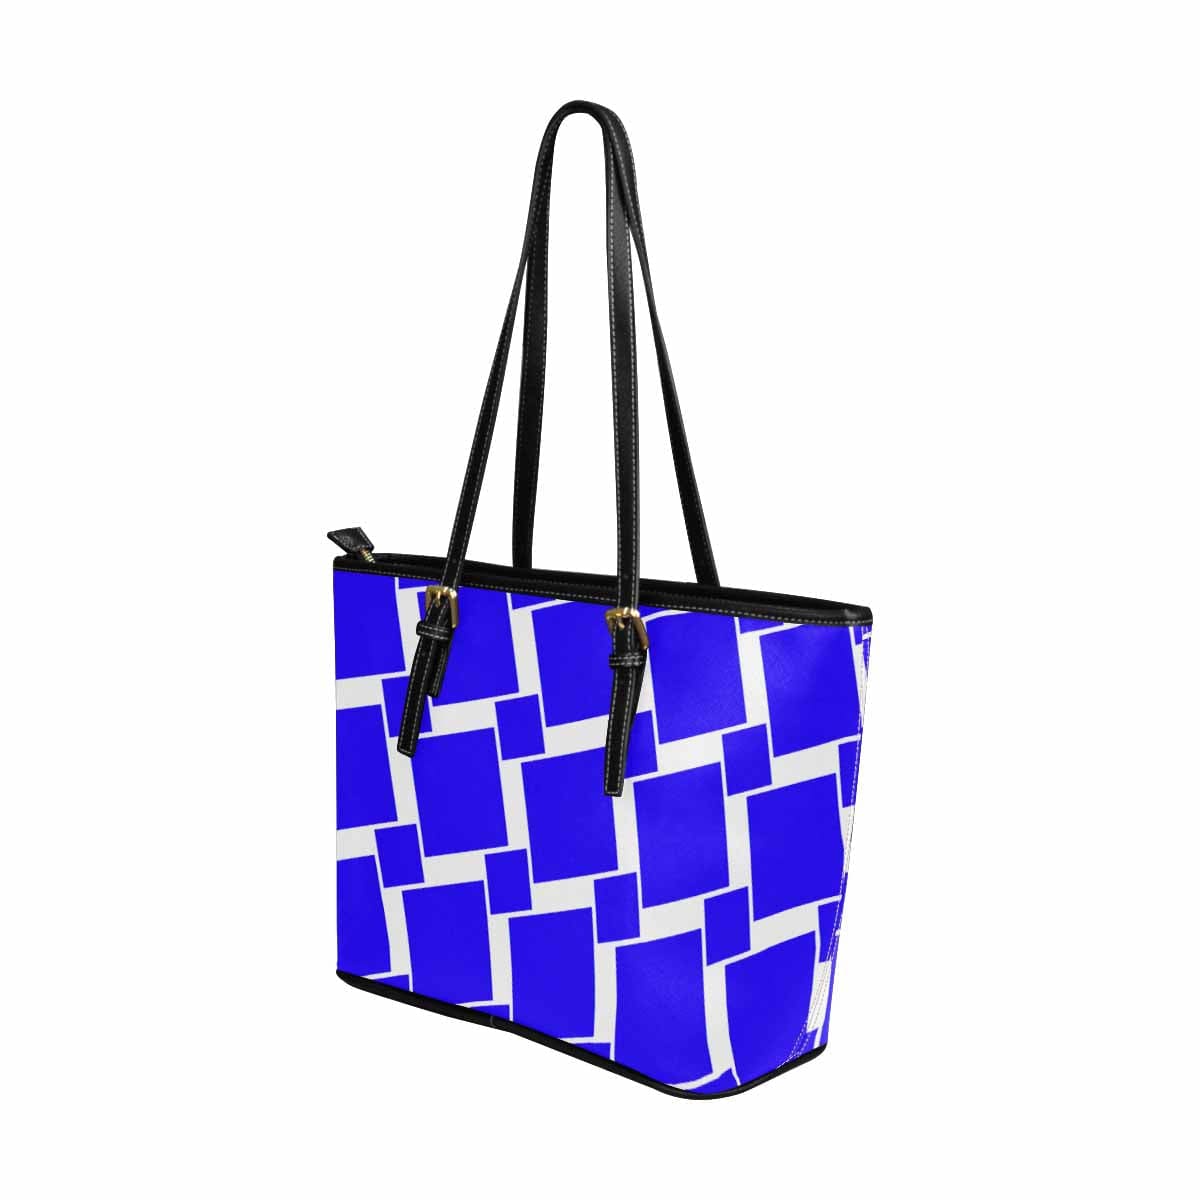 Large Leather Tote Shoulder Bag - Royal Blue - Bags | Leather Tote Bags